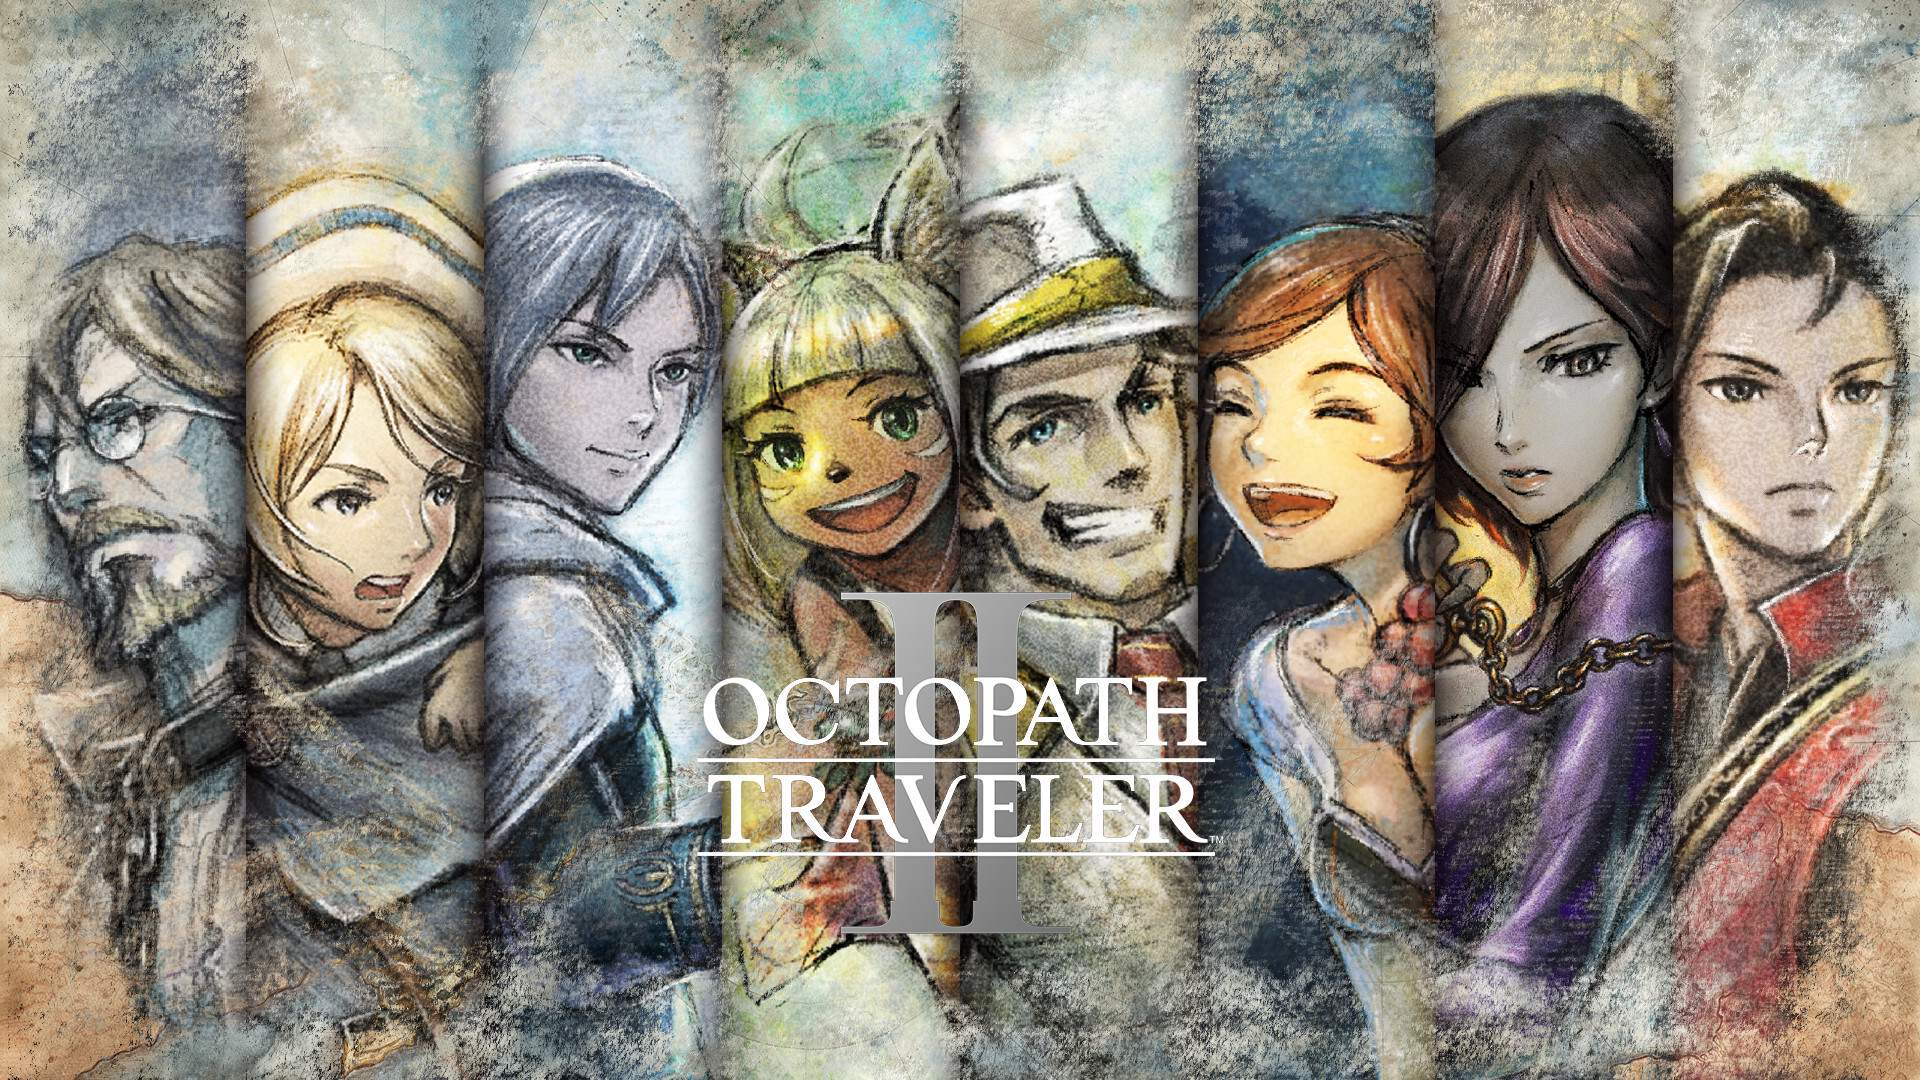 Octopath Traveler 2’s Demo Now Available for PC